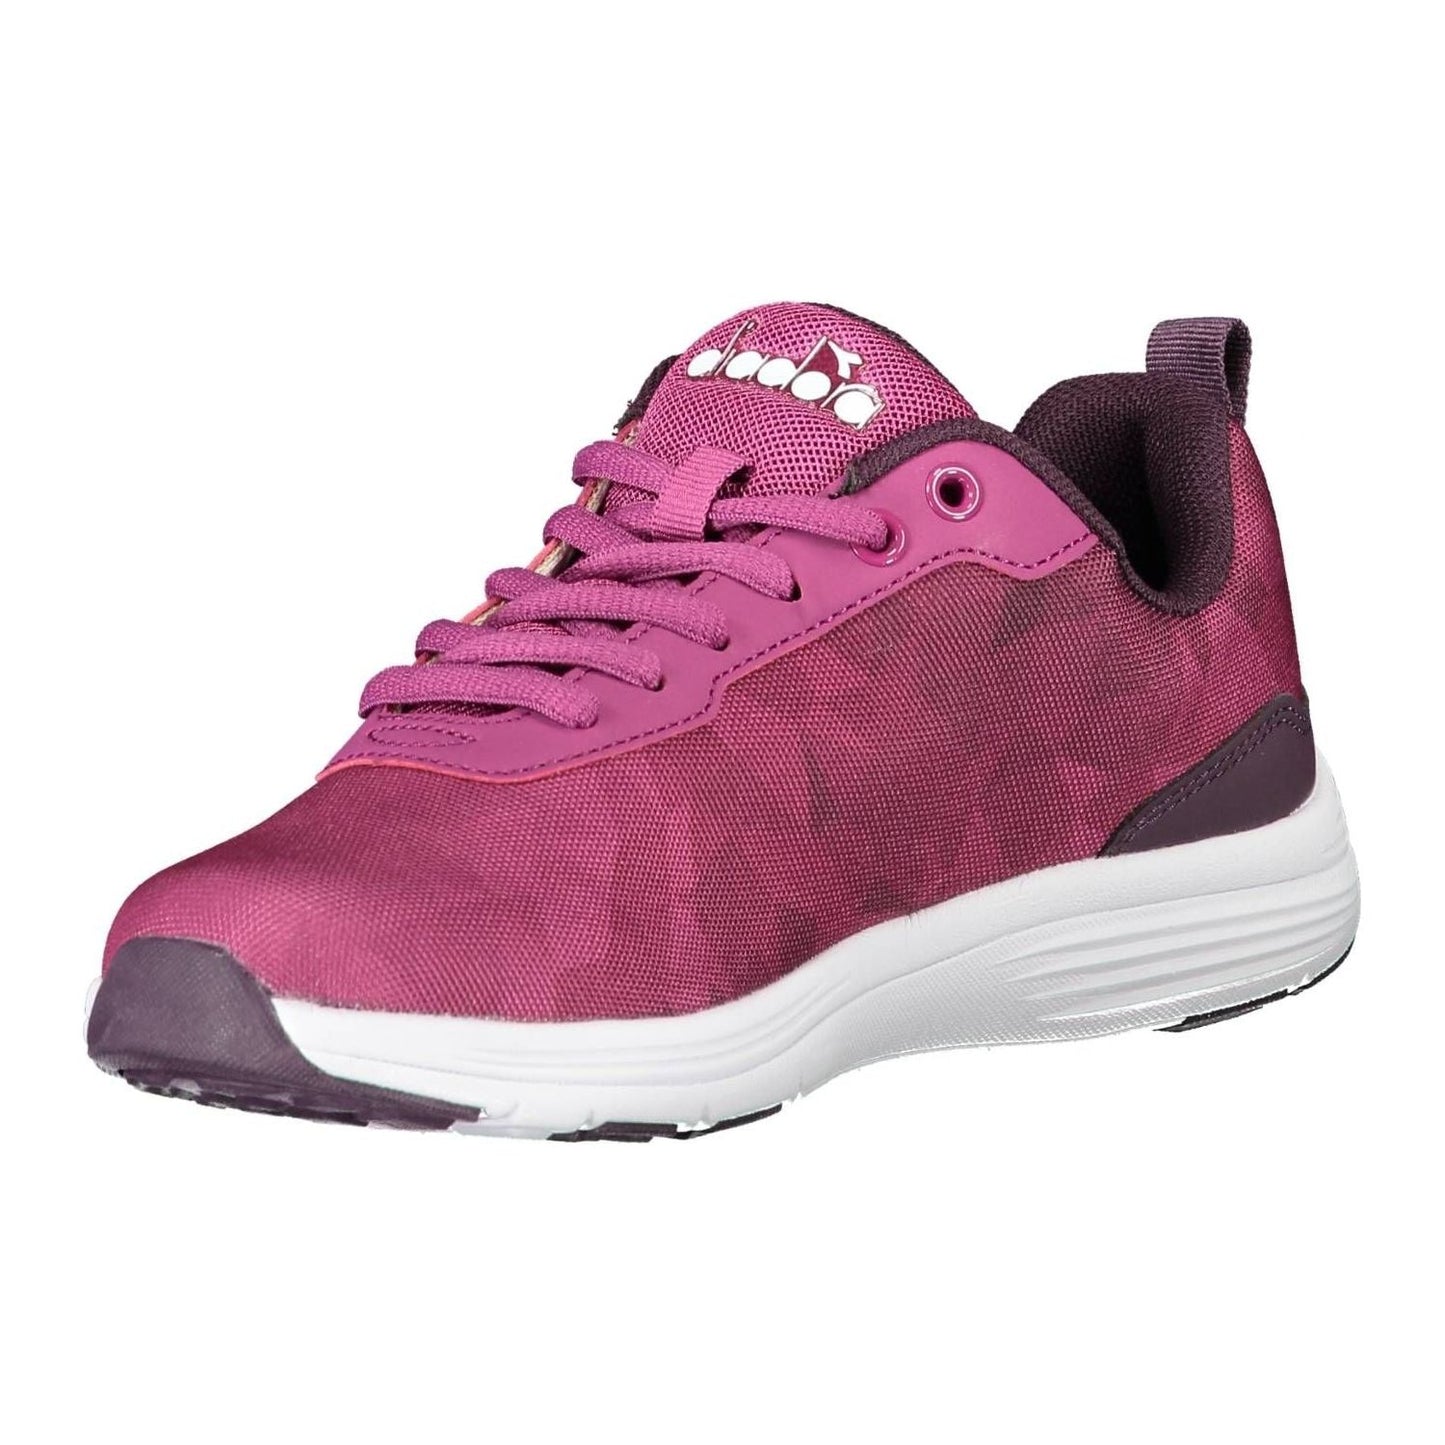 Diadora Chic Purple Sports Sneakers with Contrasting Sole chic-purple-sports-sneakers-with-contrasting-sole